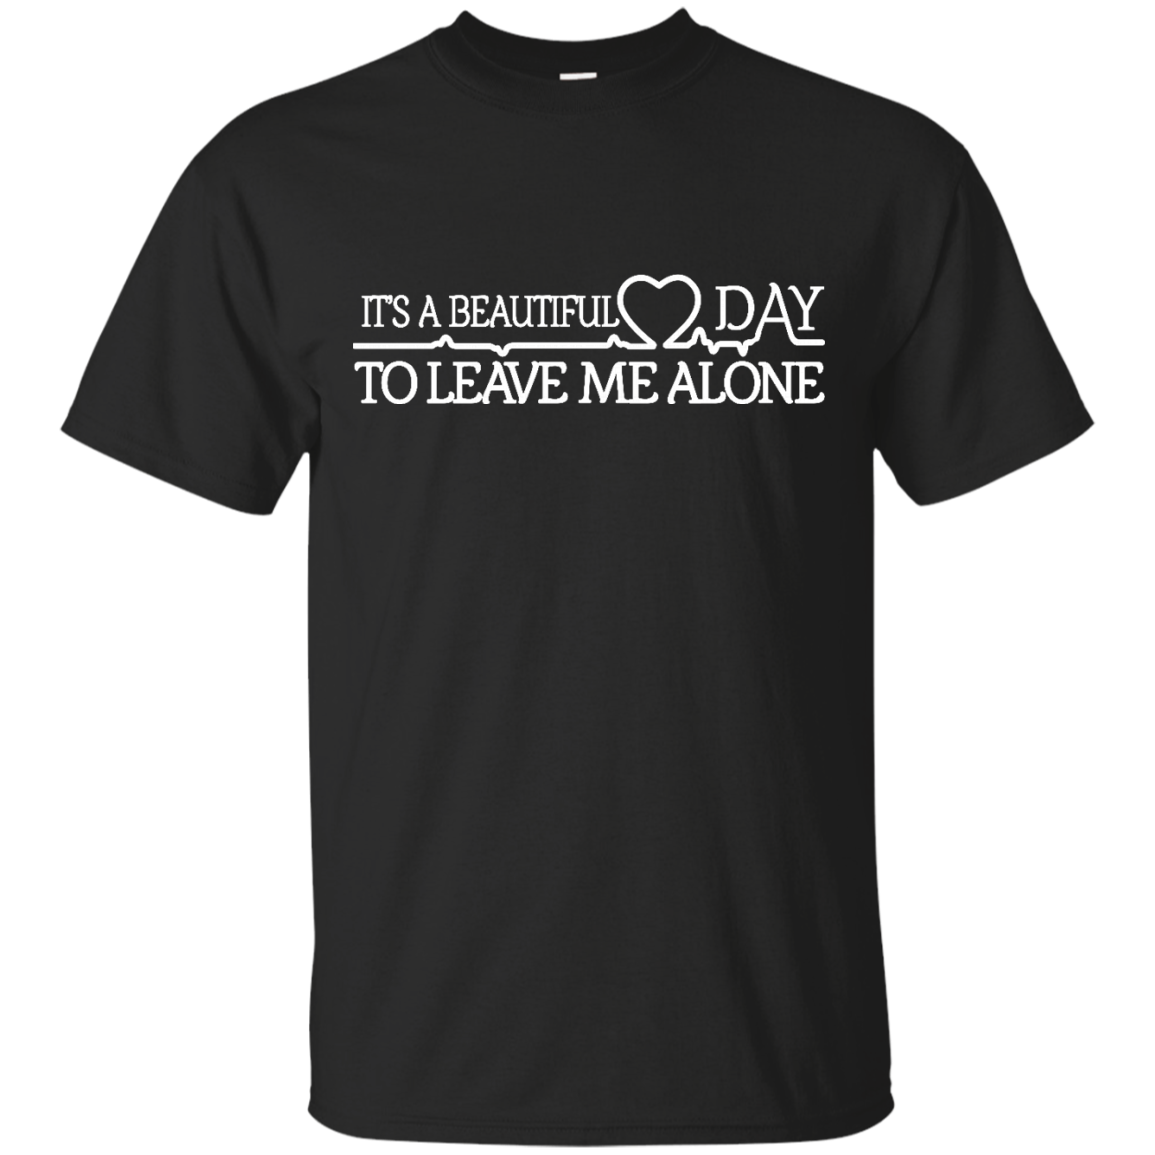 Alone Shirts It's A Beautiful Day To Leave Me Alone - Teesmiley